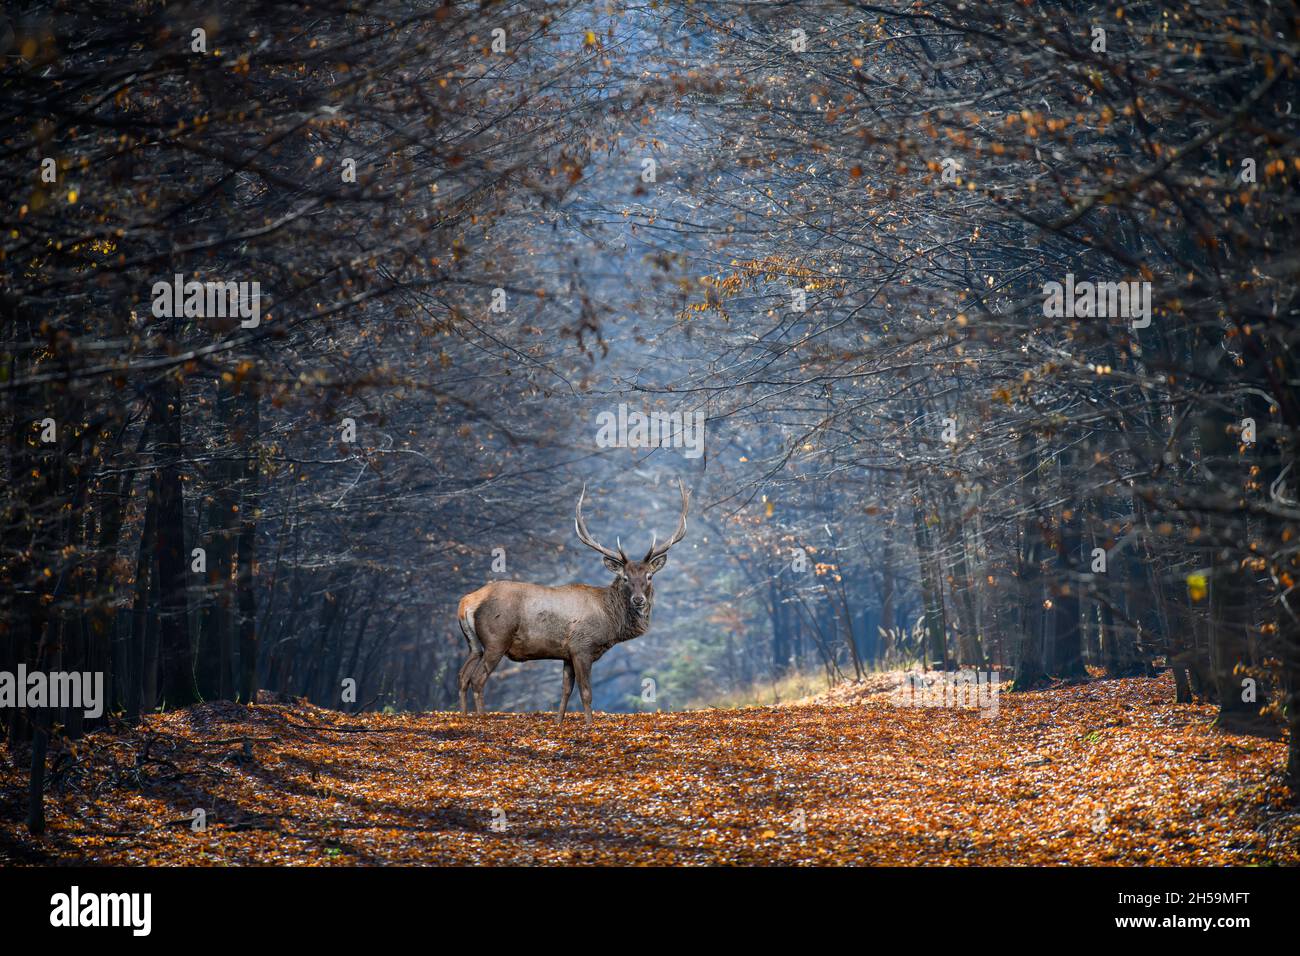 Adult male deer on a background of autumn forest. Animal in natural habitat. Wildlife scene Stock Photo